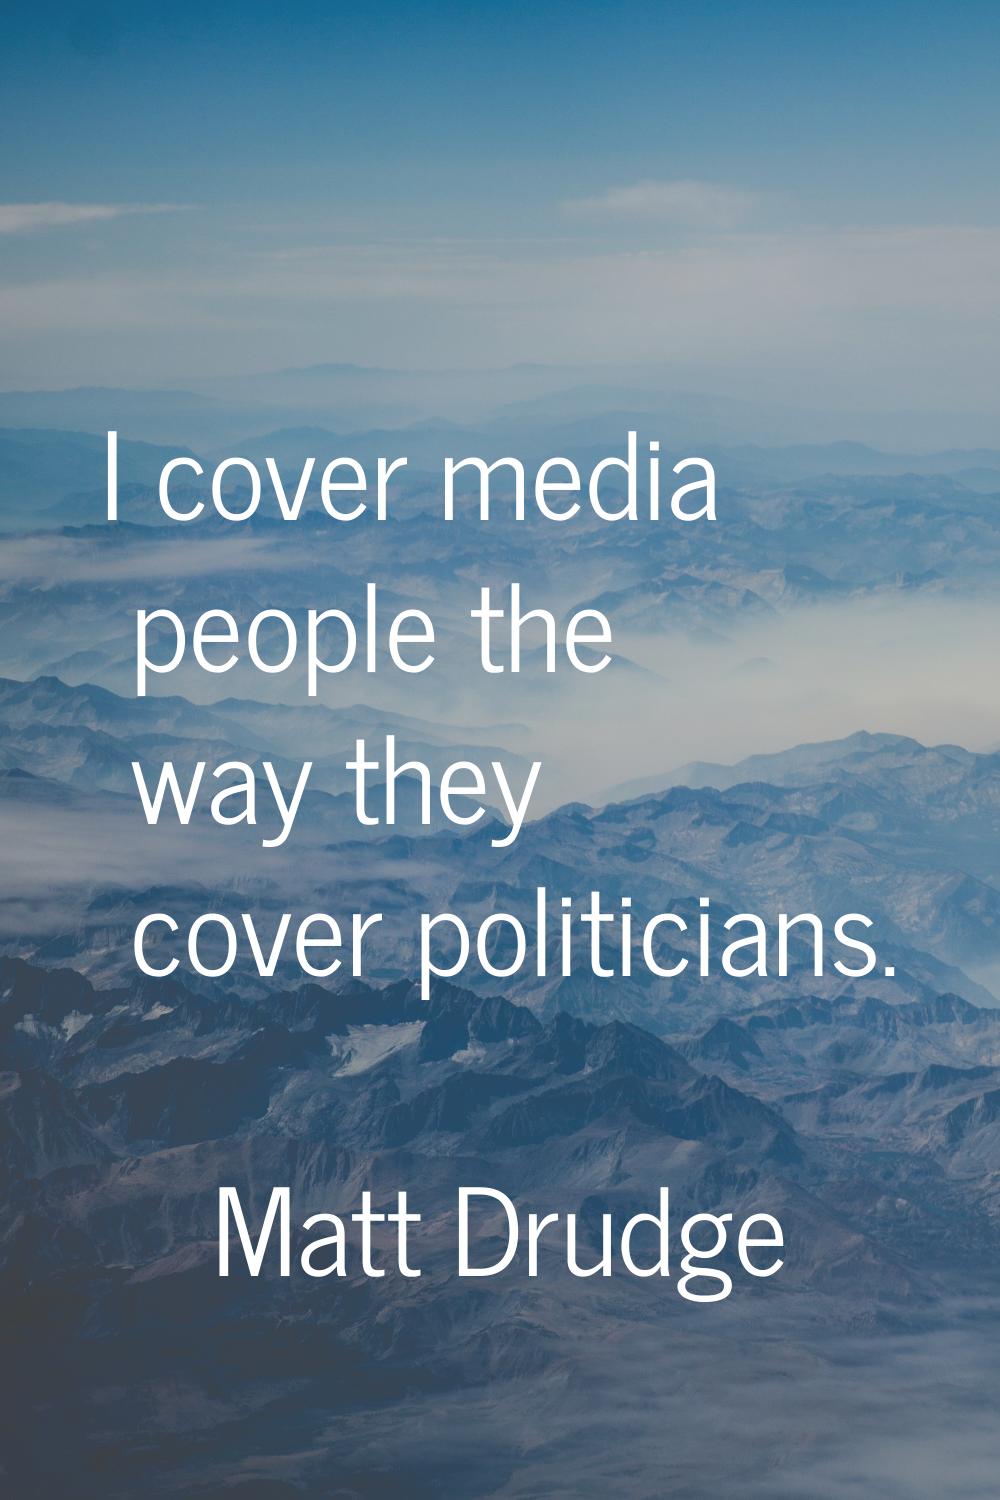 I cover media people the way they cover politicians.